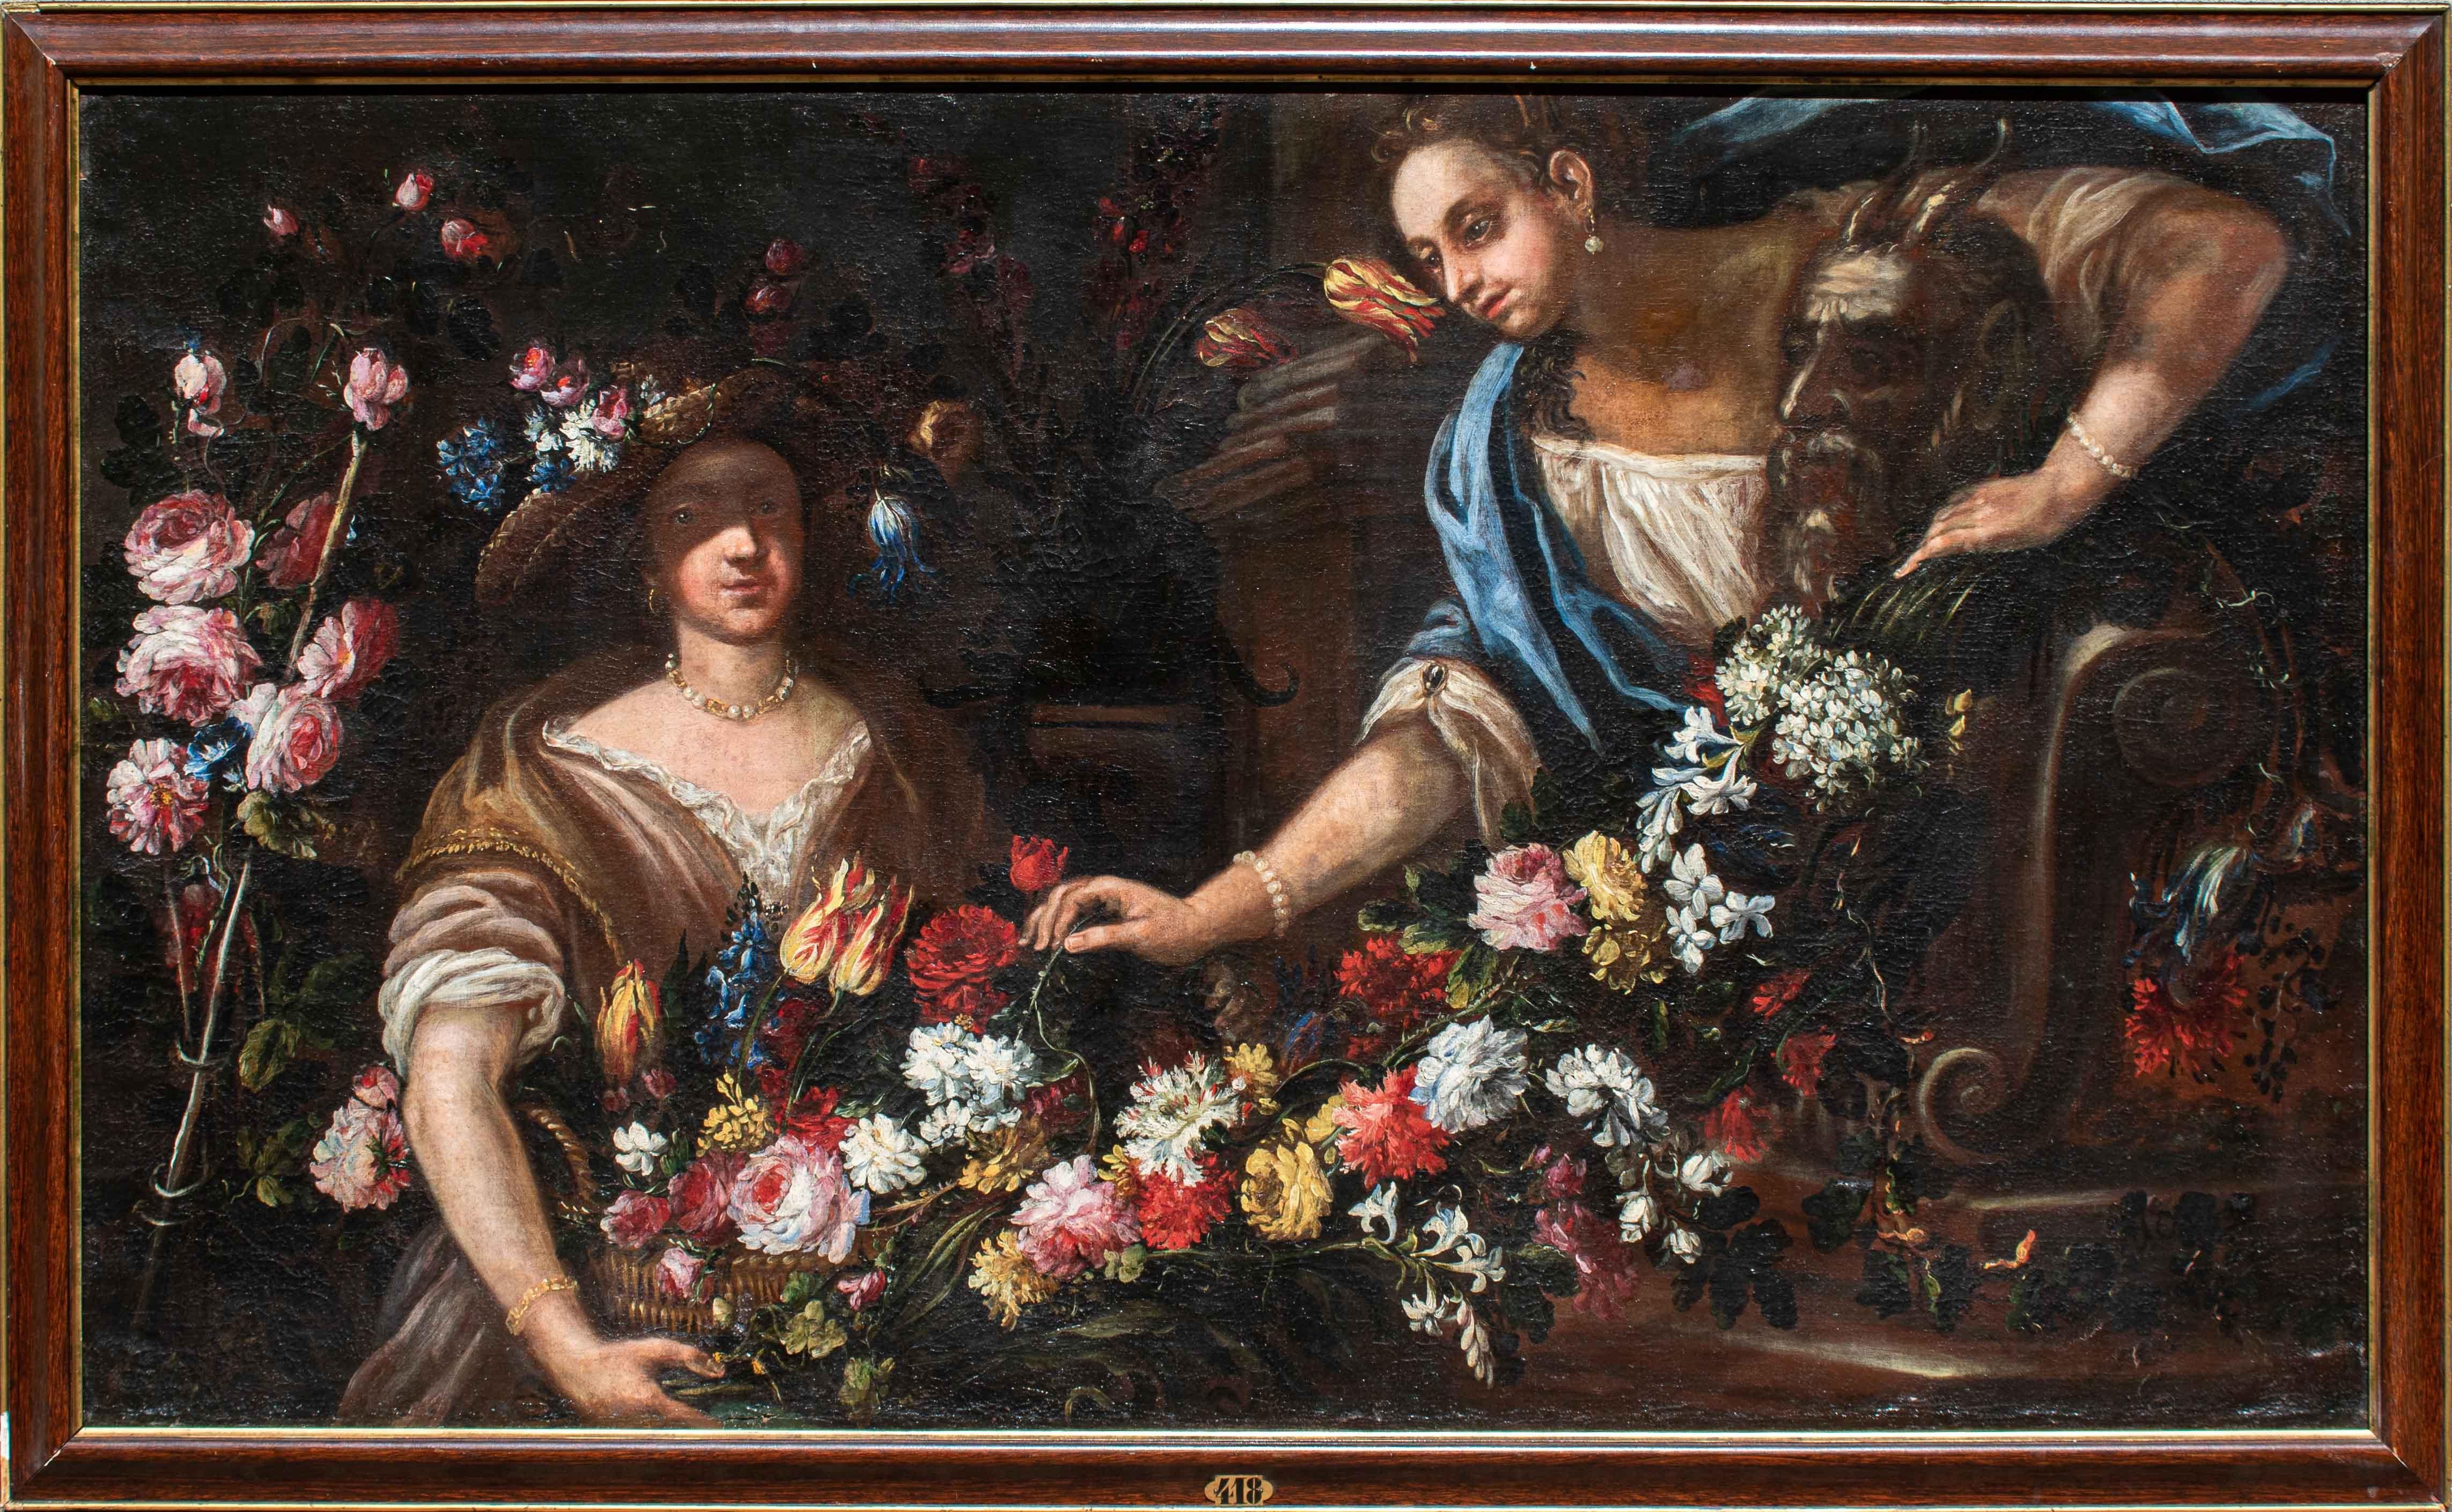 Felice Boselli (Piacenza, 1650 - Parma, 1732)

Still life with two women

Oil on canvas, 98.5 x 164 cm

Frame 108 x 175.5 

The refined composition depicting a floral still life with two women is attributable by stylistic and formal characteristics